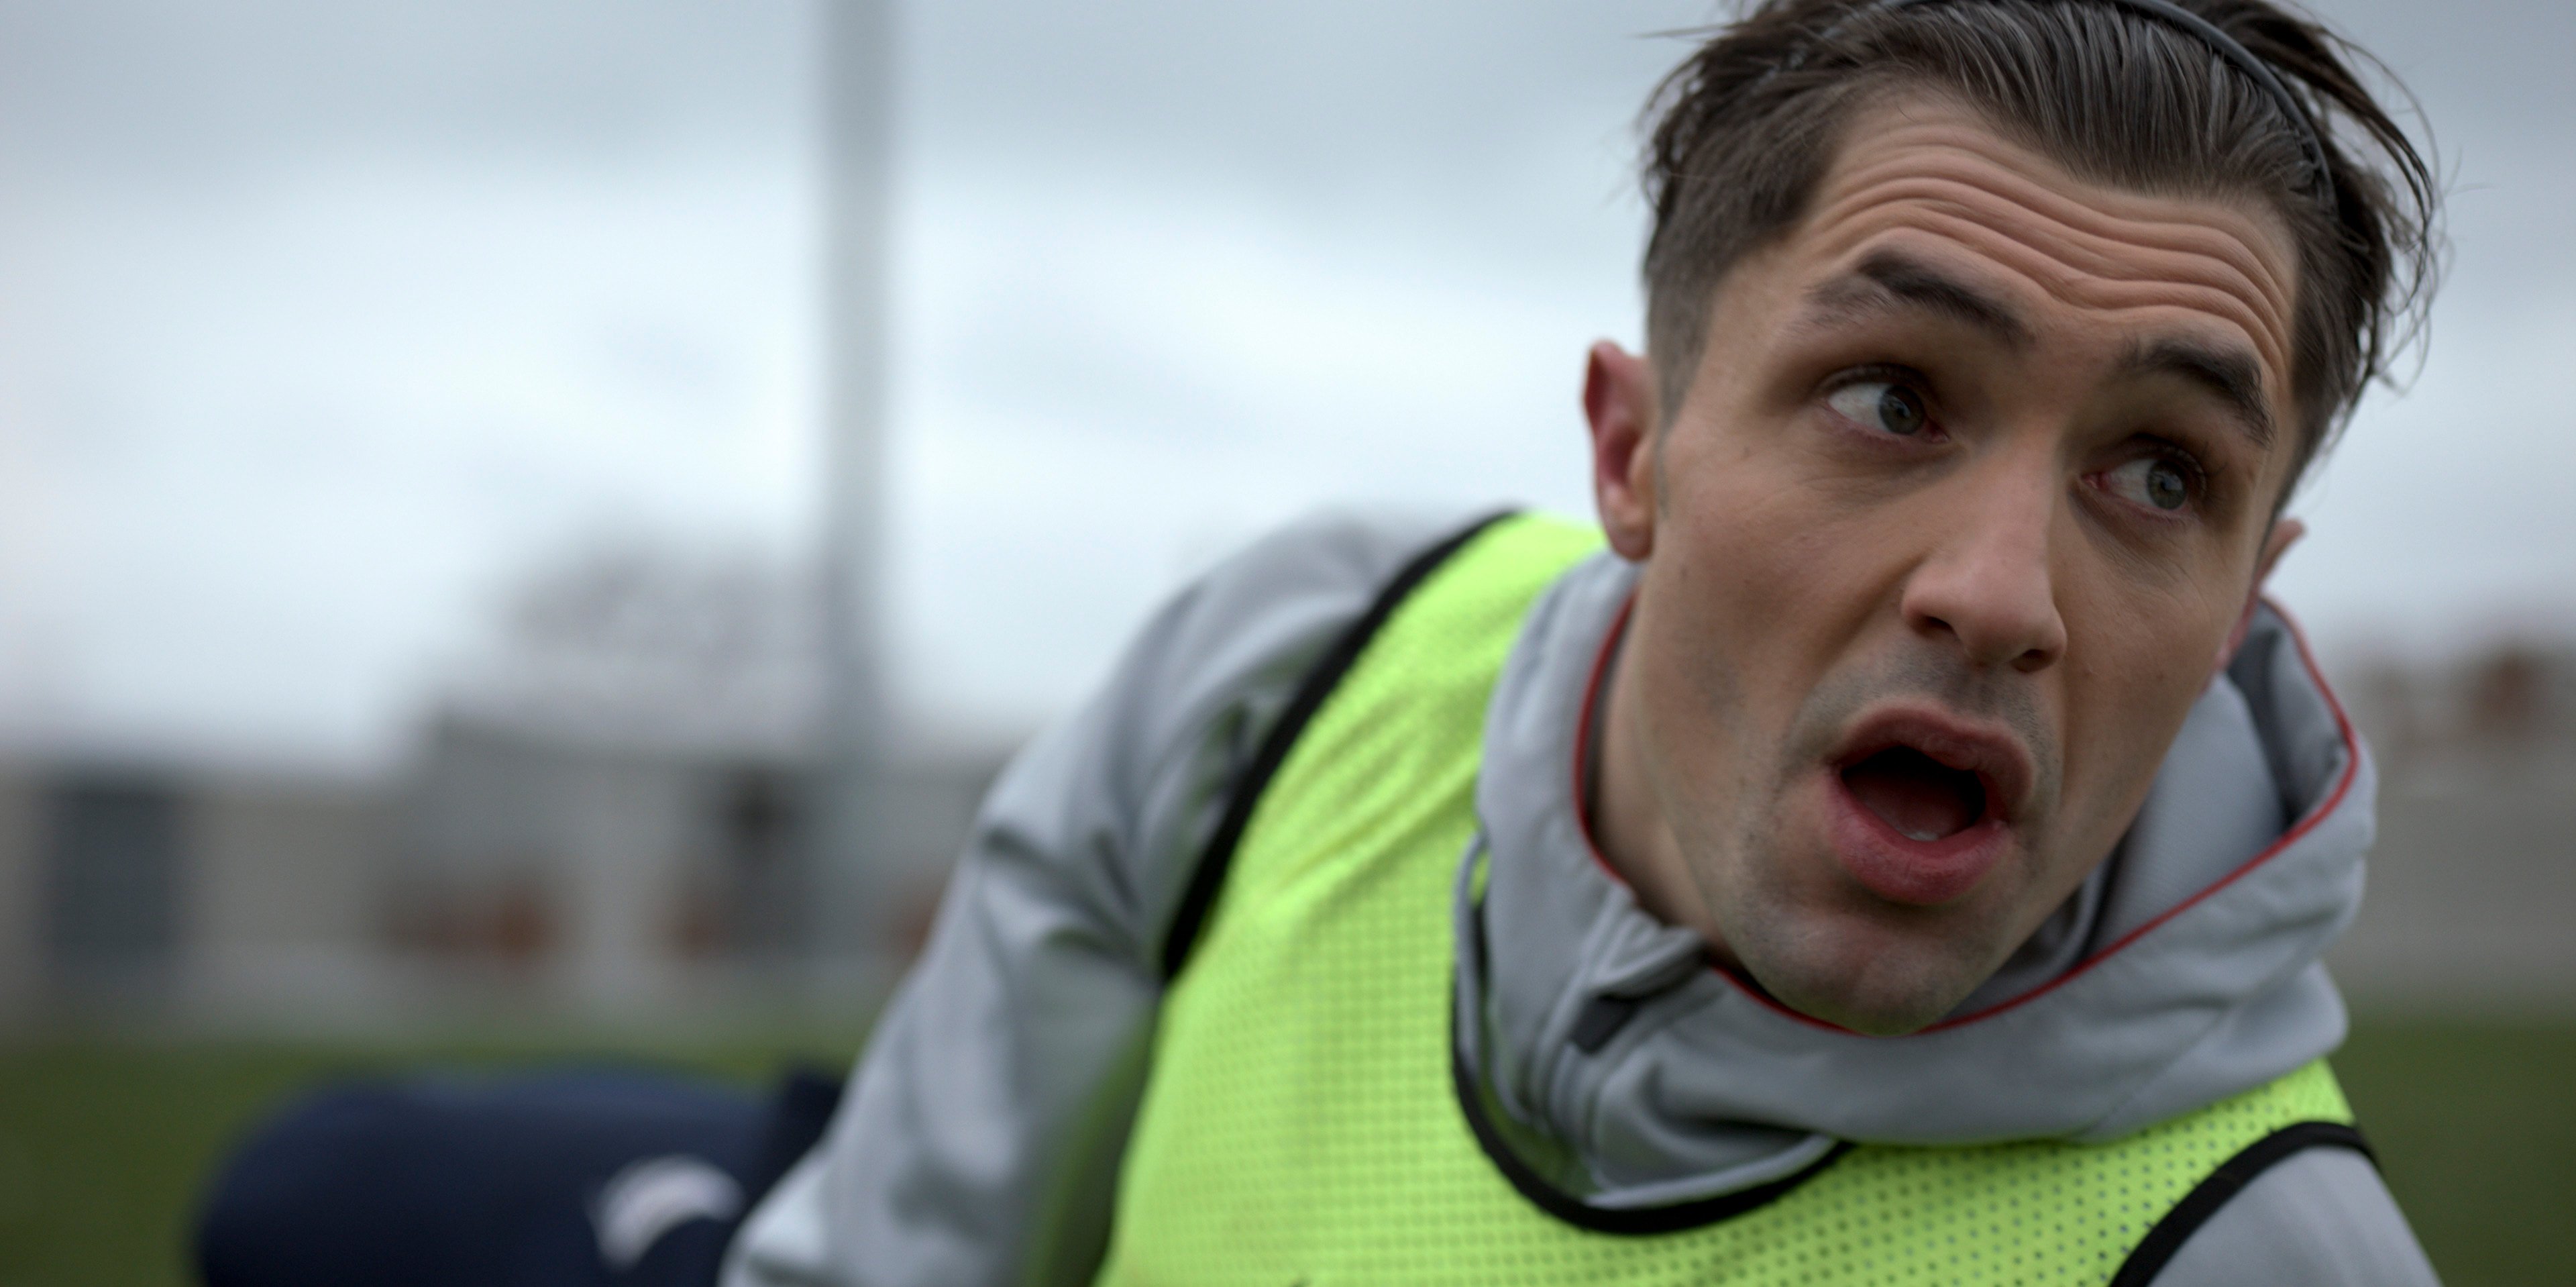 Phil Dunster as Jamie Tartt lying on the soccer field in a neon yellow practice vest In a season 2 episode of the Apple TV+ series 'Ted Lasso'